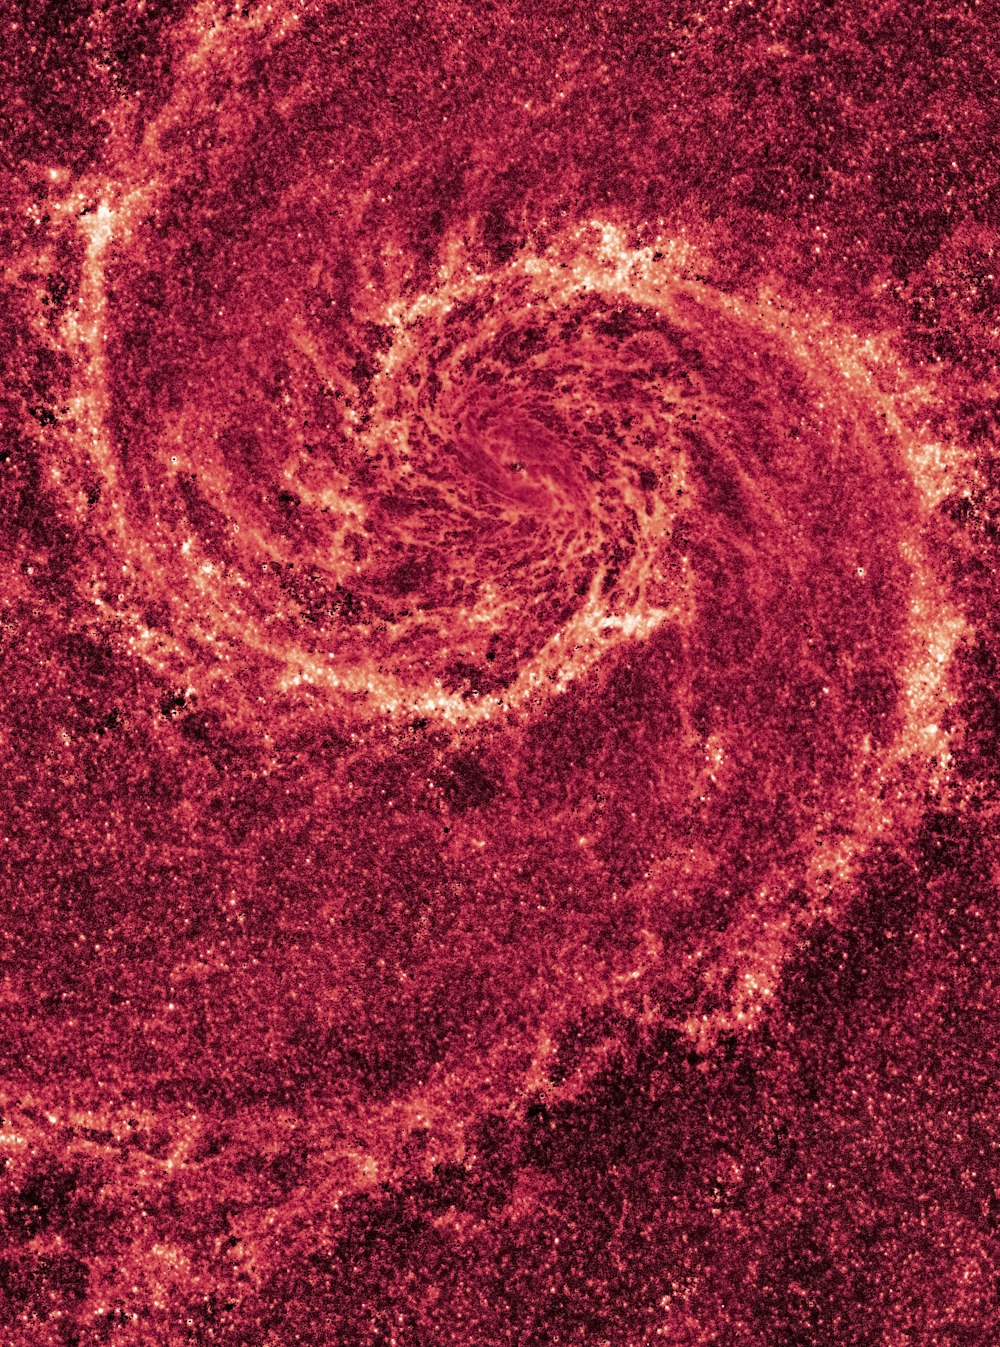 a red spiral is shown in the middle of the image